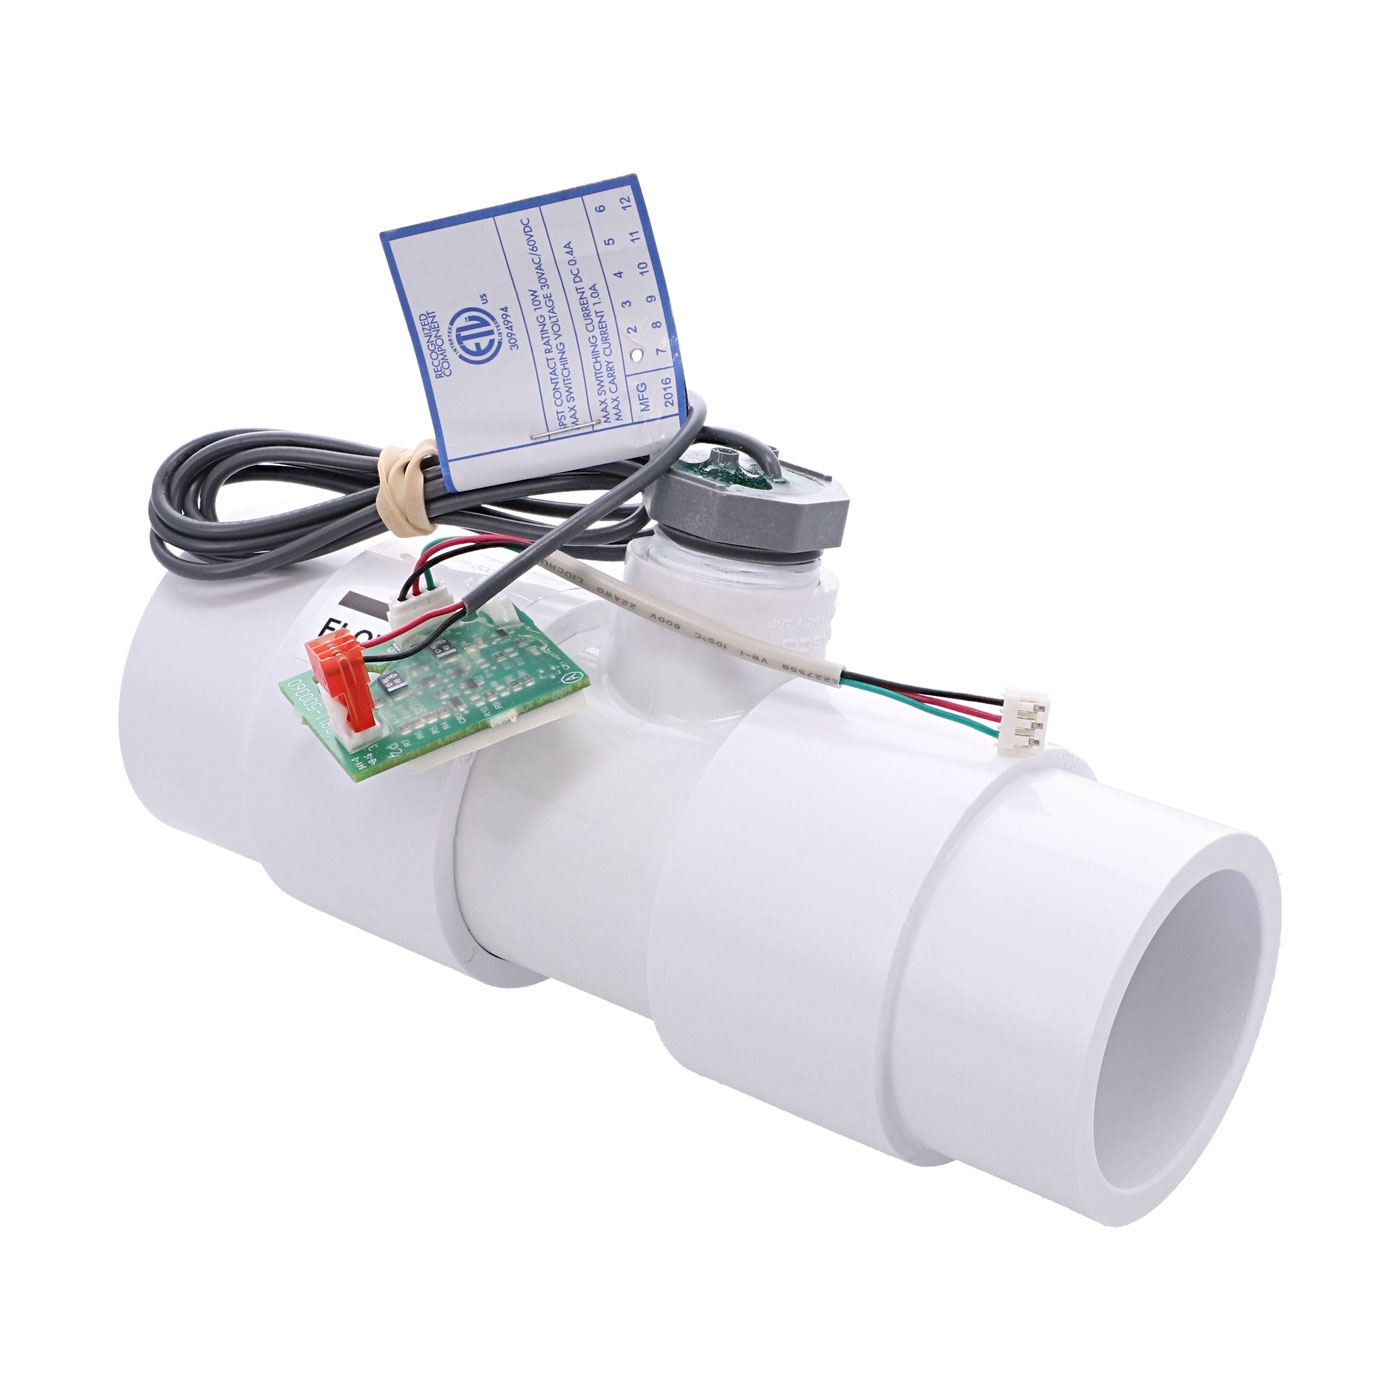 Flow switch replacement kit for Gecko Control Systems